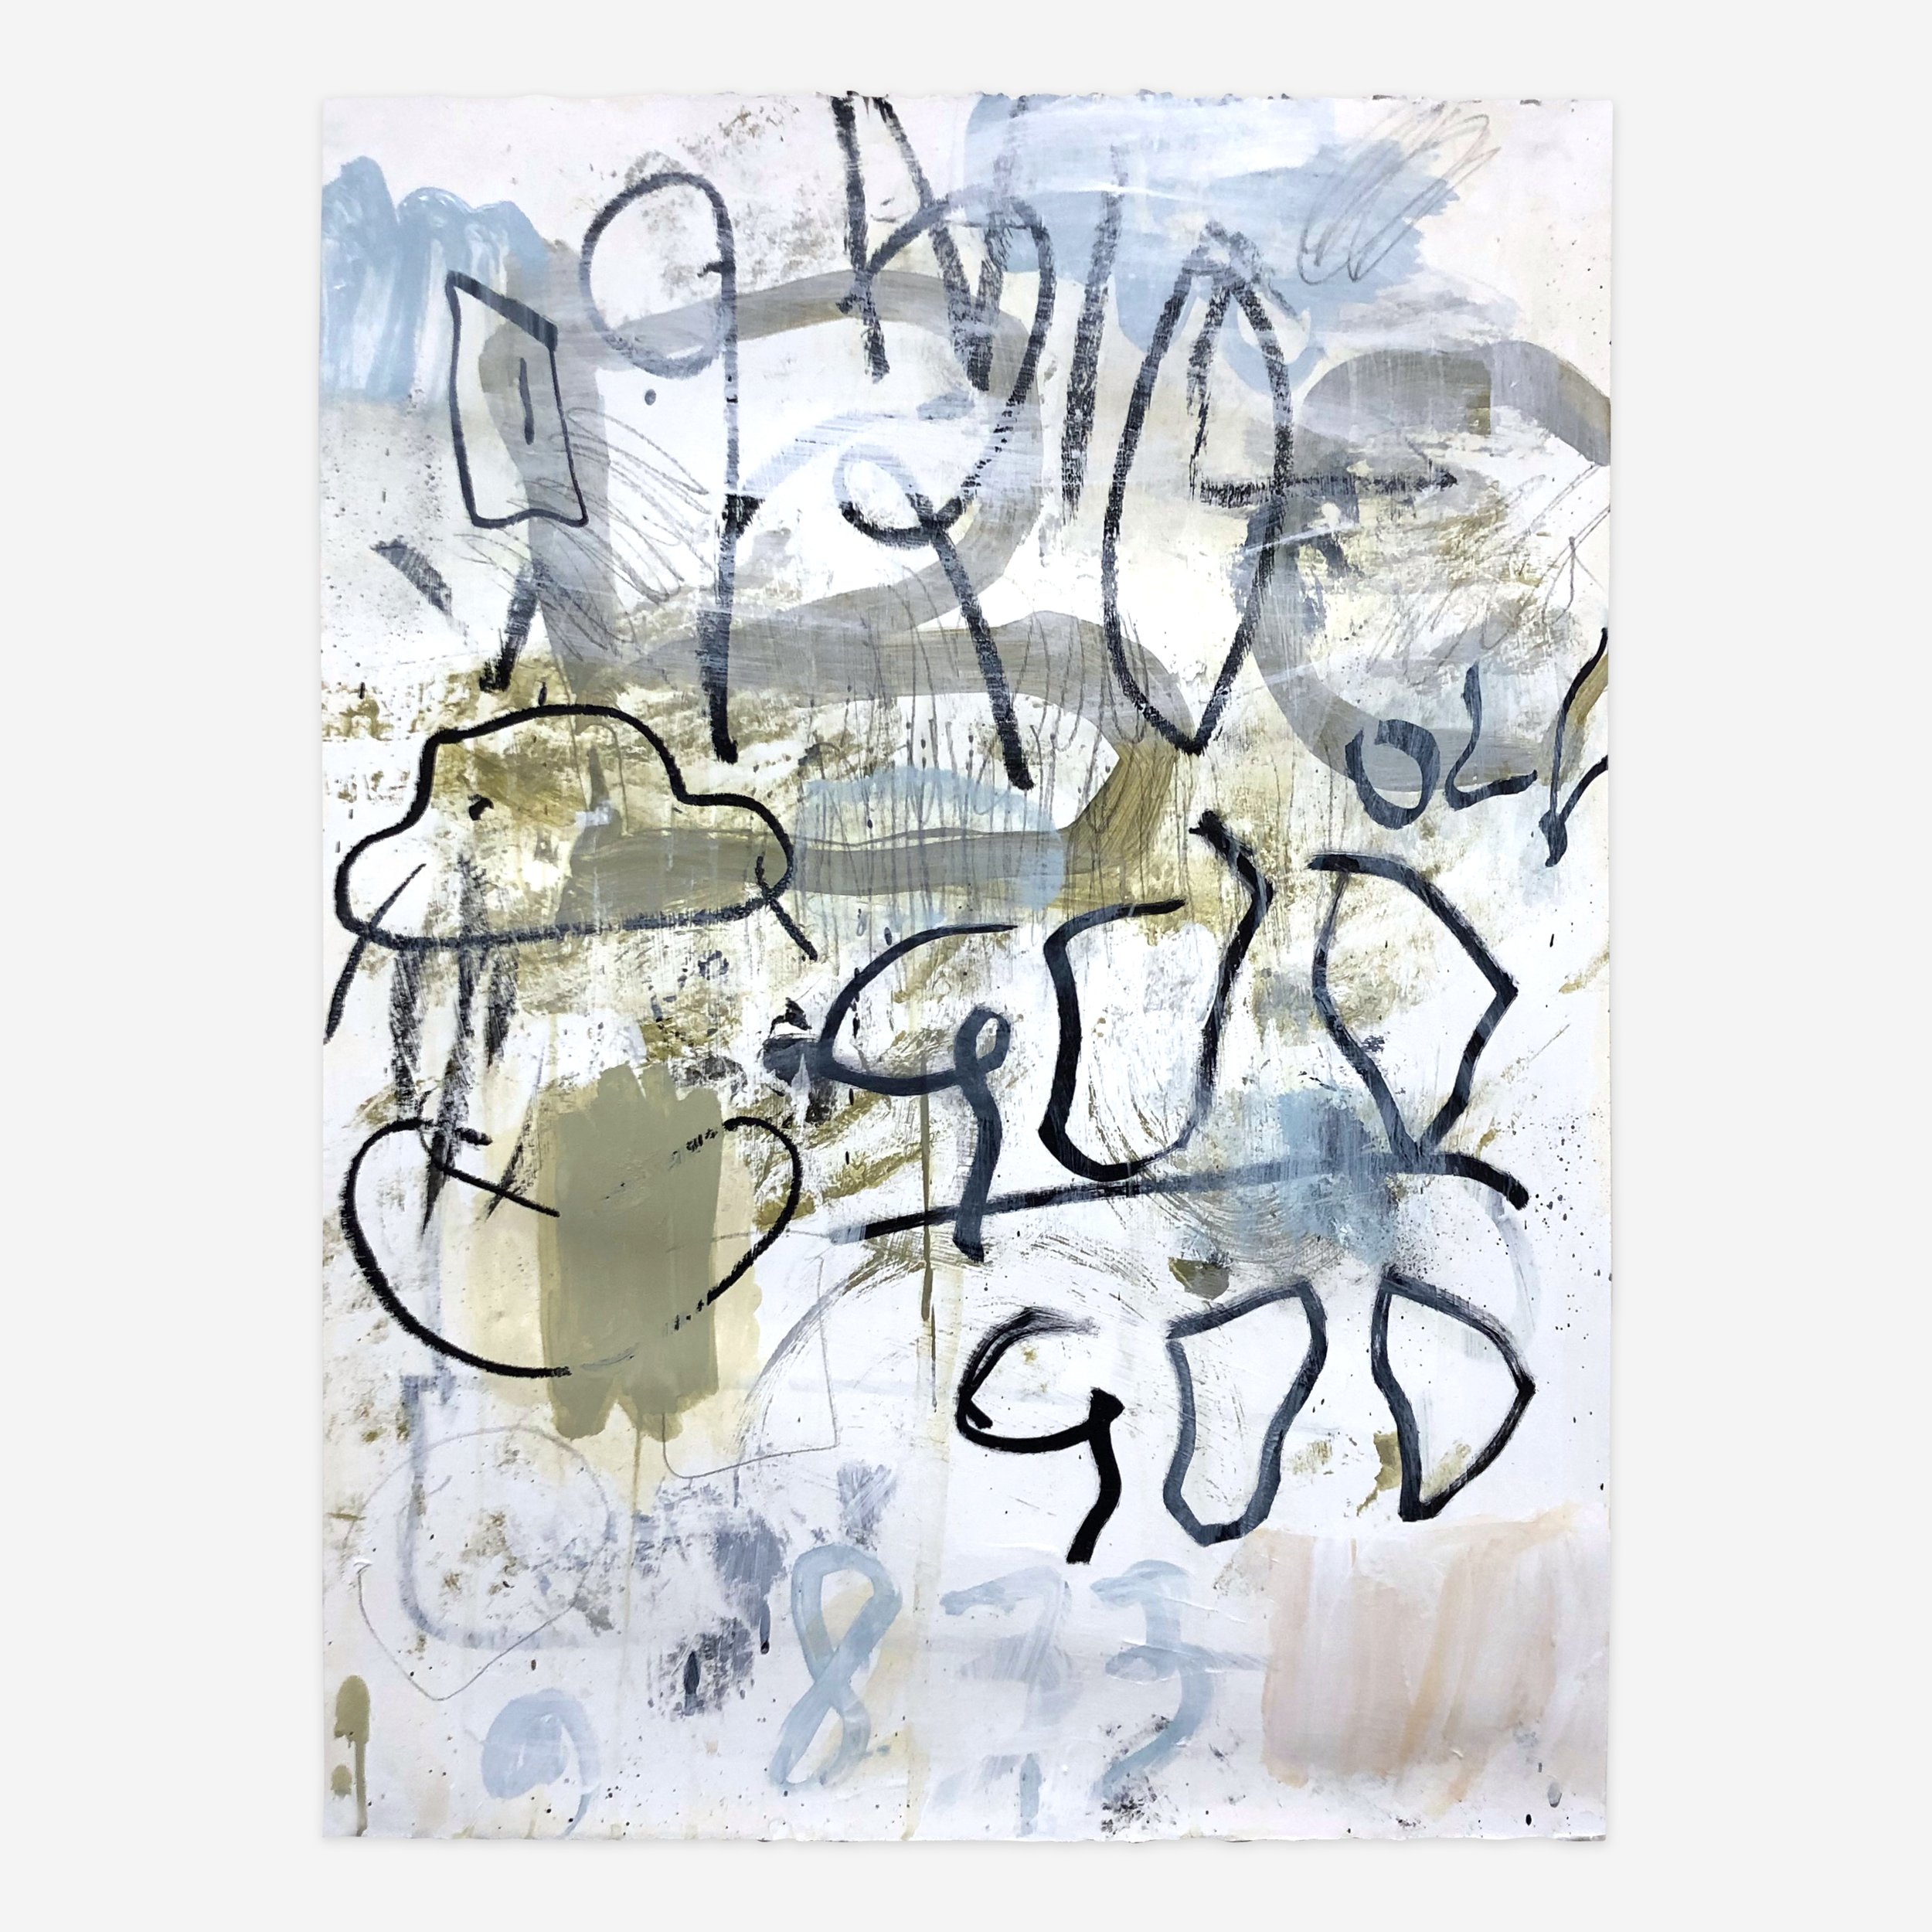   Untitled (040619,)  mixed media on paper, 22" x 30", 2019   $400.00 includes US shipping     BUY NOW     